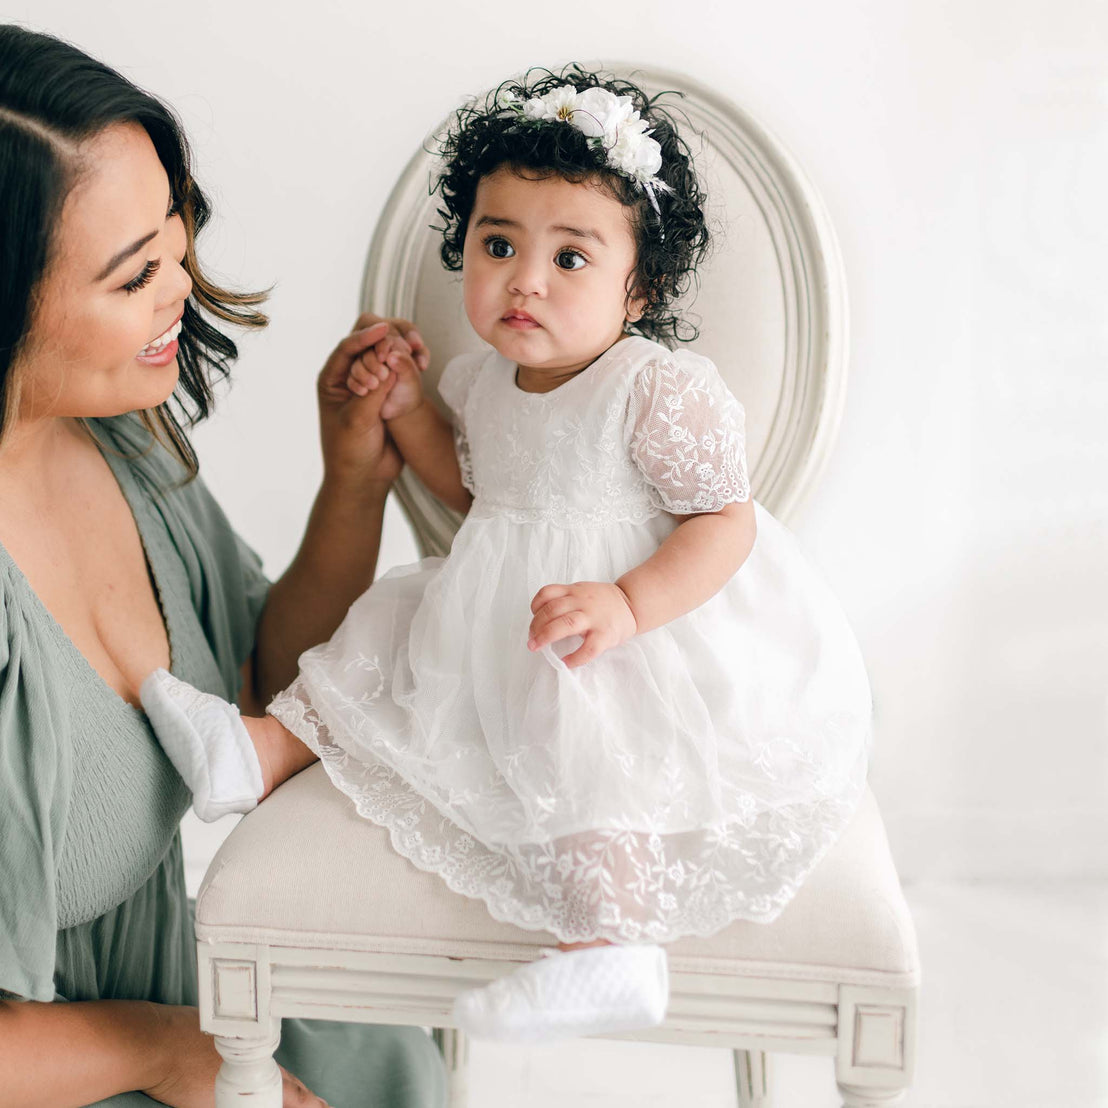 A woman smiles at a baby in an Ella Romper Dress sitting on an elegant chair. The baby wears a floral headband and looks curiously towards the camera. The background is bright and soft-focused.